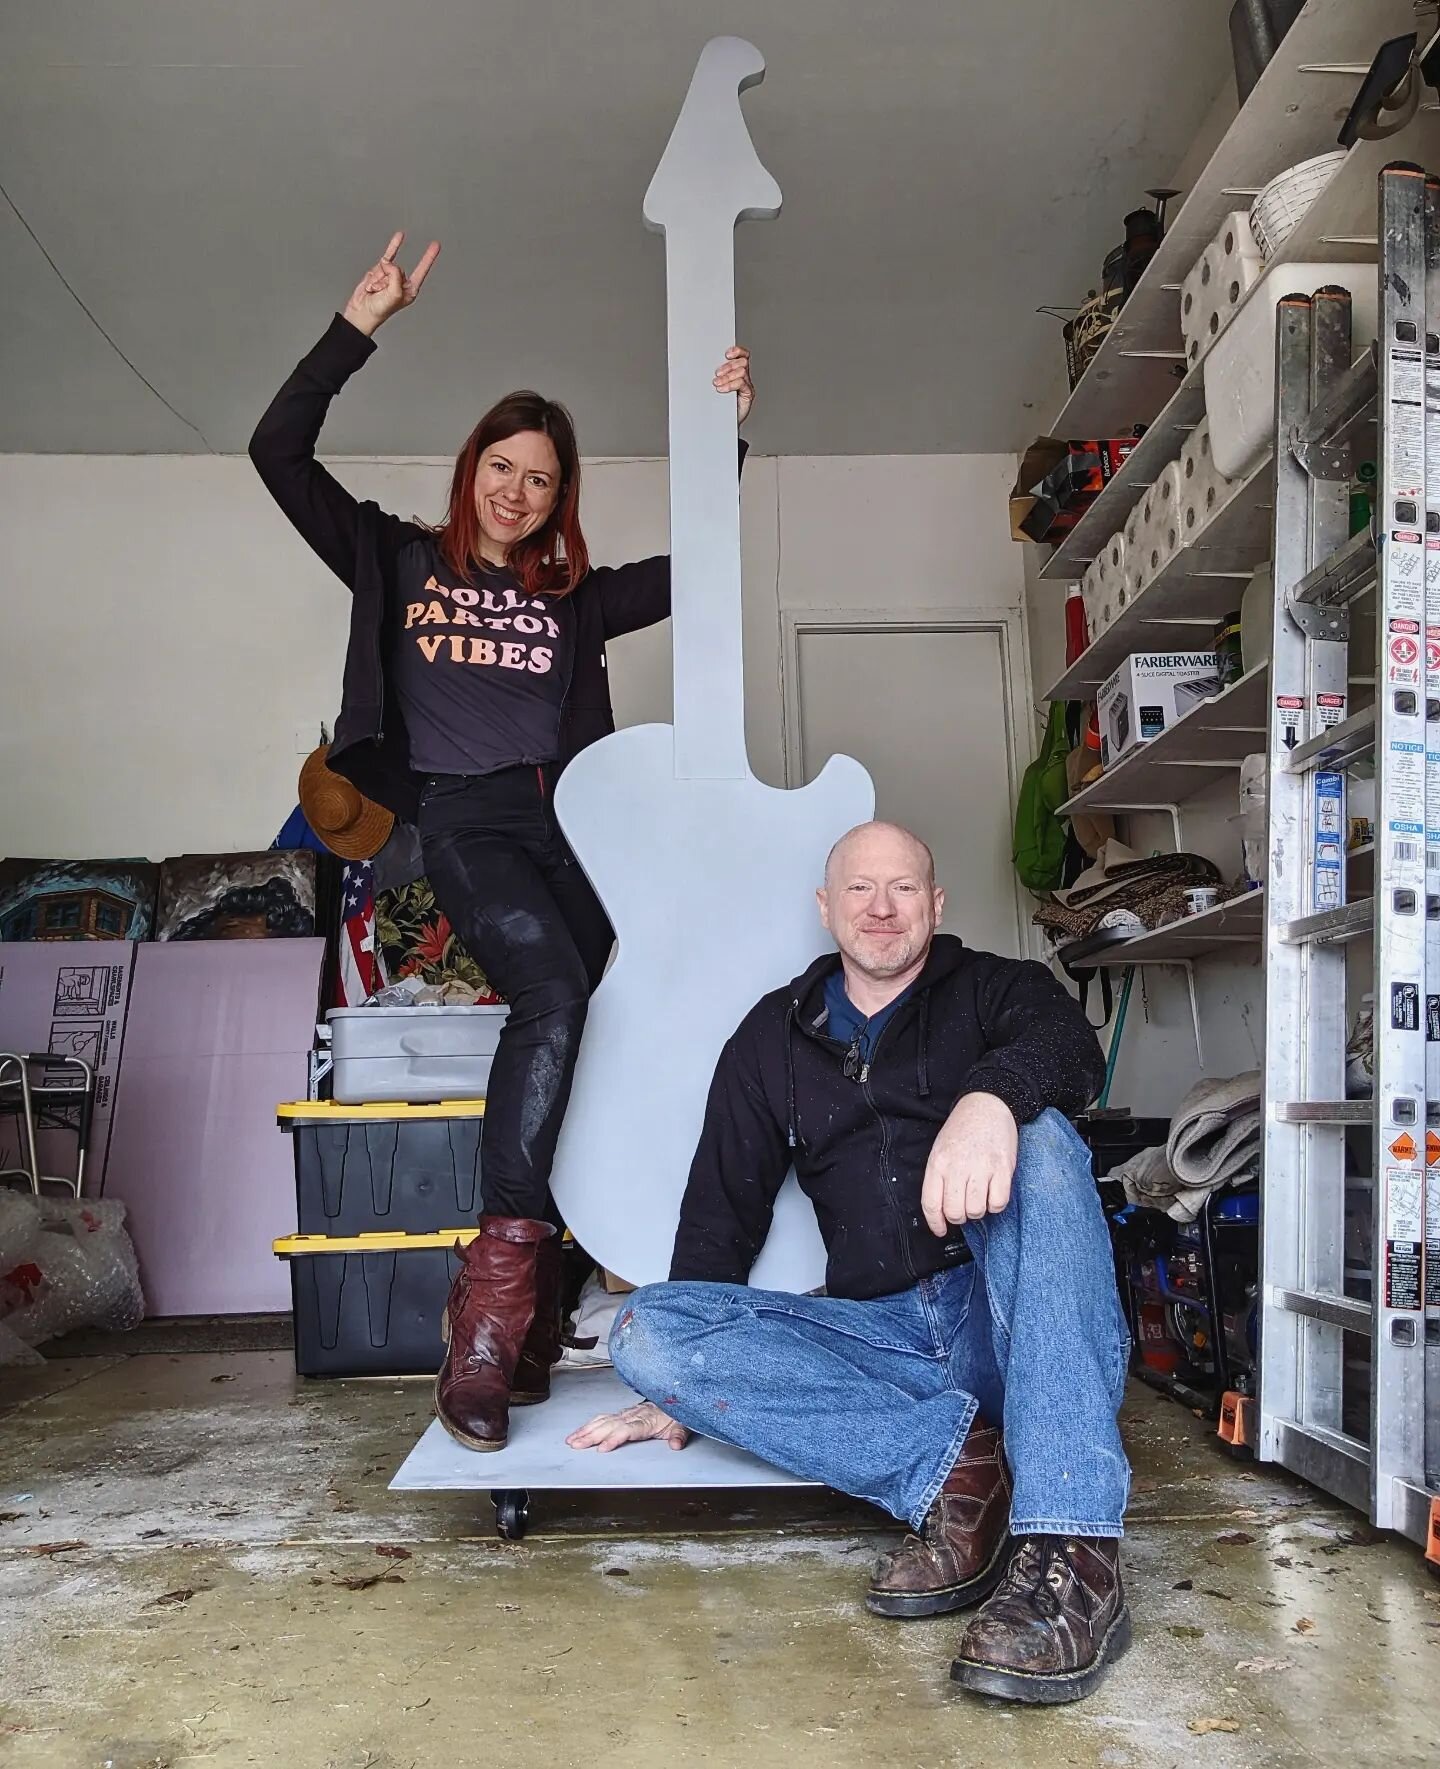 Dante and I are READY TO ROCK! We are collaborating on painting an 8' guitar for Downtown Joliet's 2023 Interactive Street Art Exhibit&nbsp;&quot;Ready to Rock!&quot; Keep your eyes 👀 on my page and stories for updates and info about the unveiling e